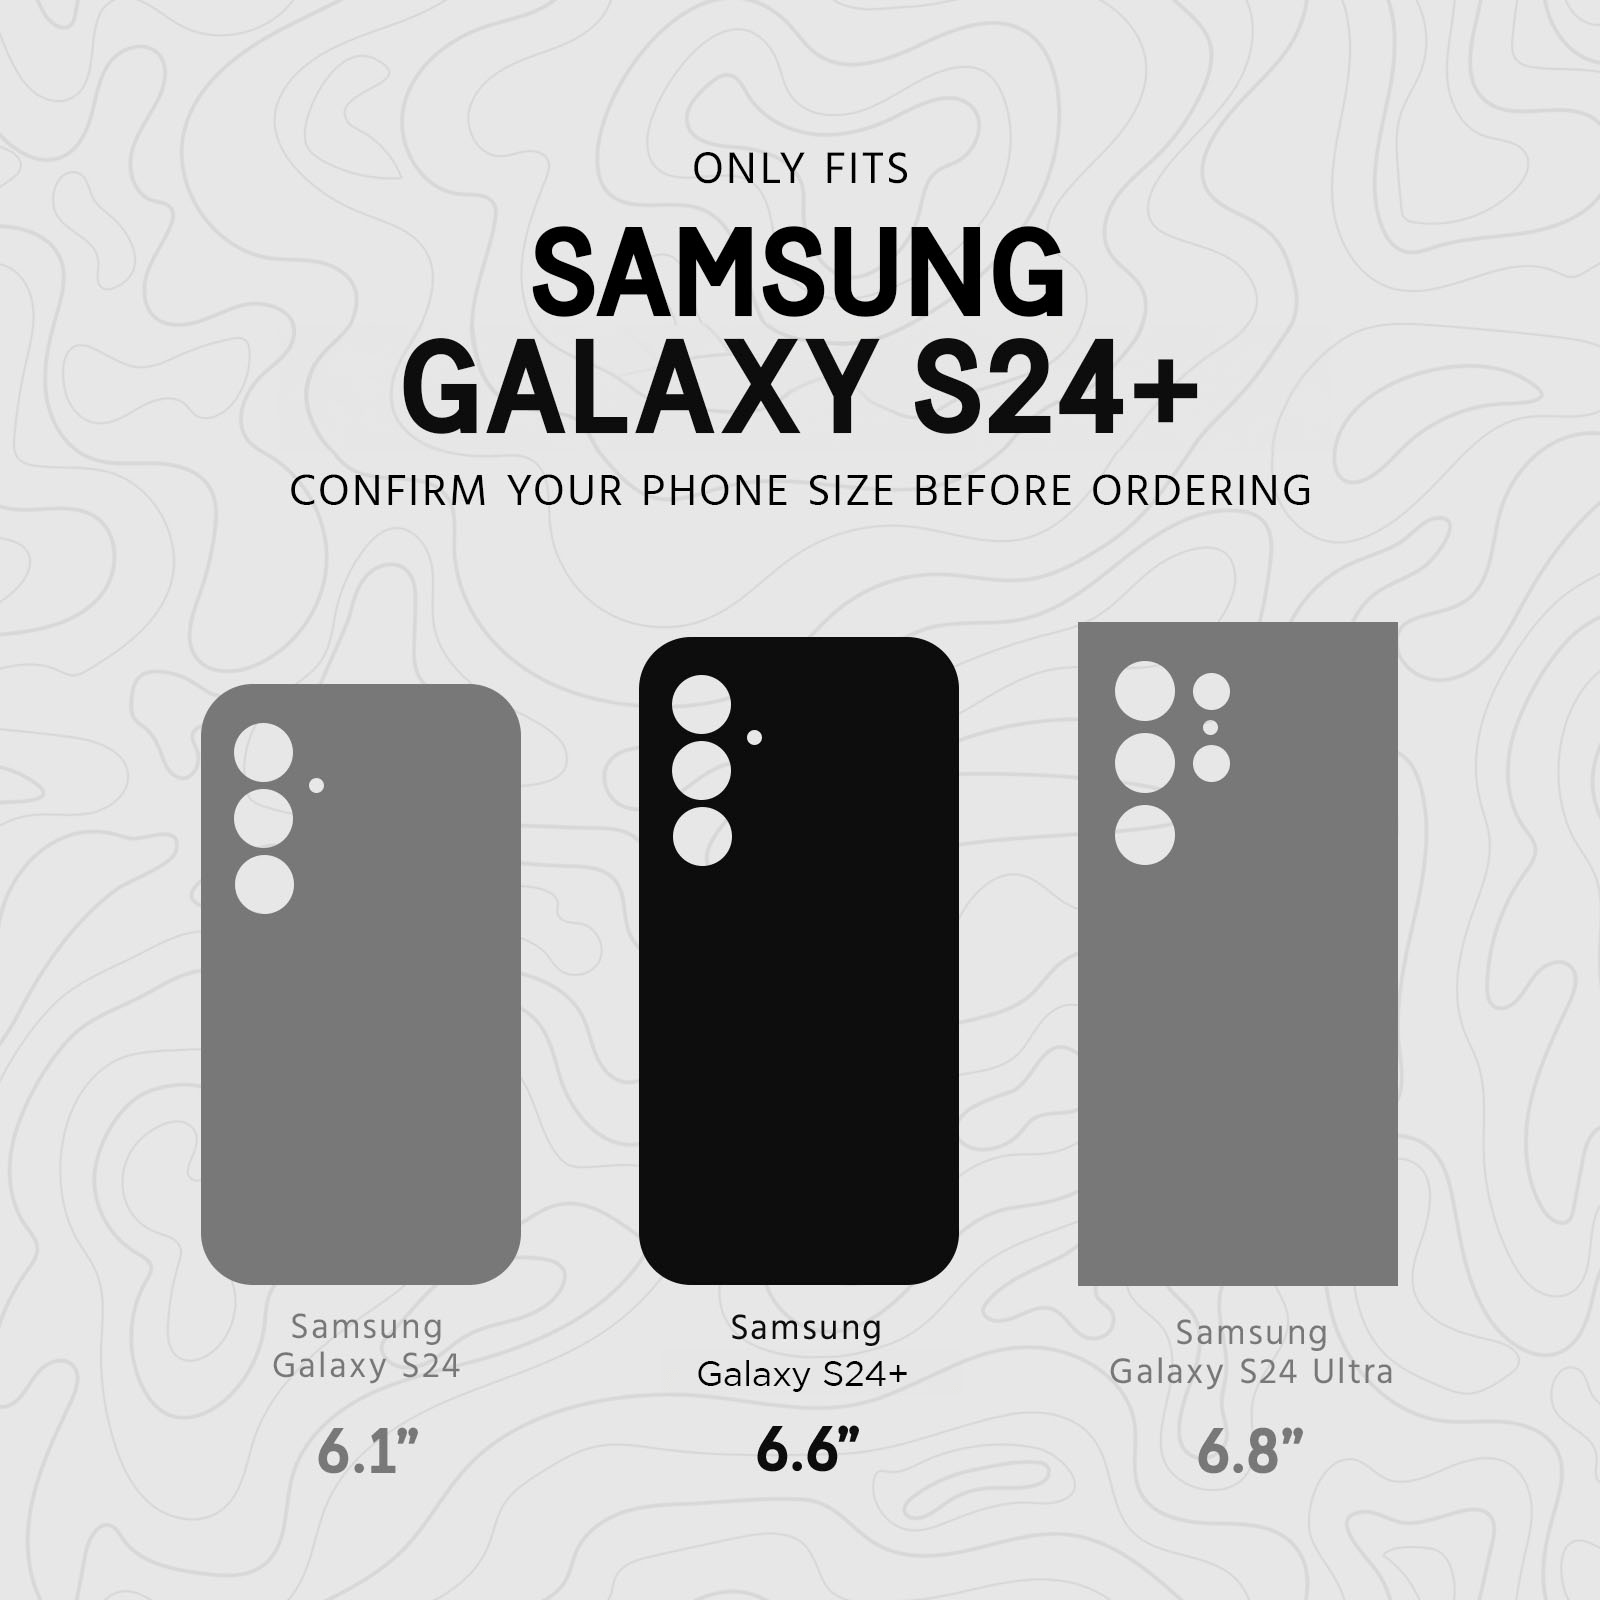 ONLY FITS SAMSUNG GALAXY S24+. CONFIRM YOUR PHONE SIZE BEFORE ORDERING